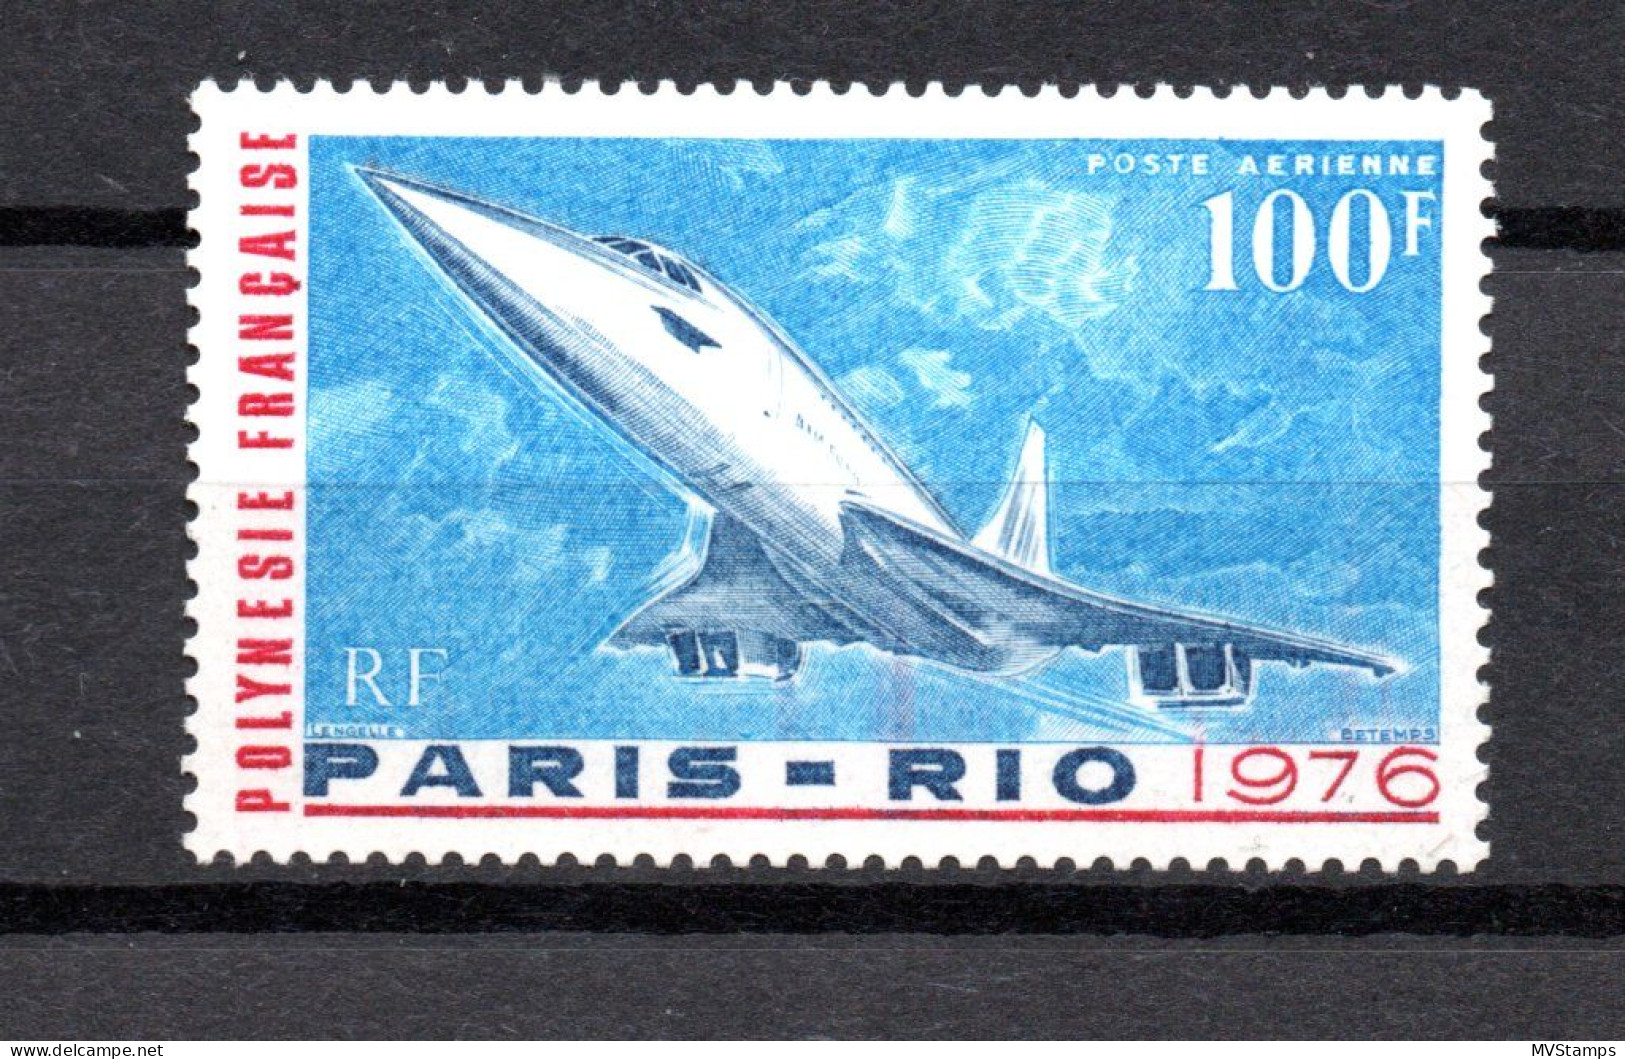 Polynesia (France ) 1976 Concorde/Aviation/airmail Stamp (Michel 208) MNH - Neufs